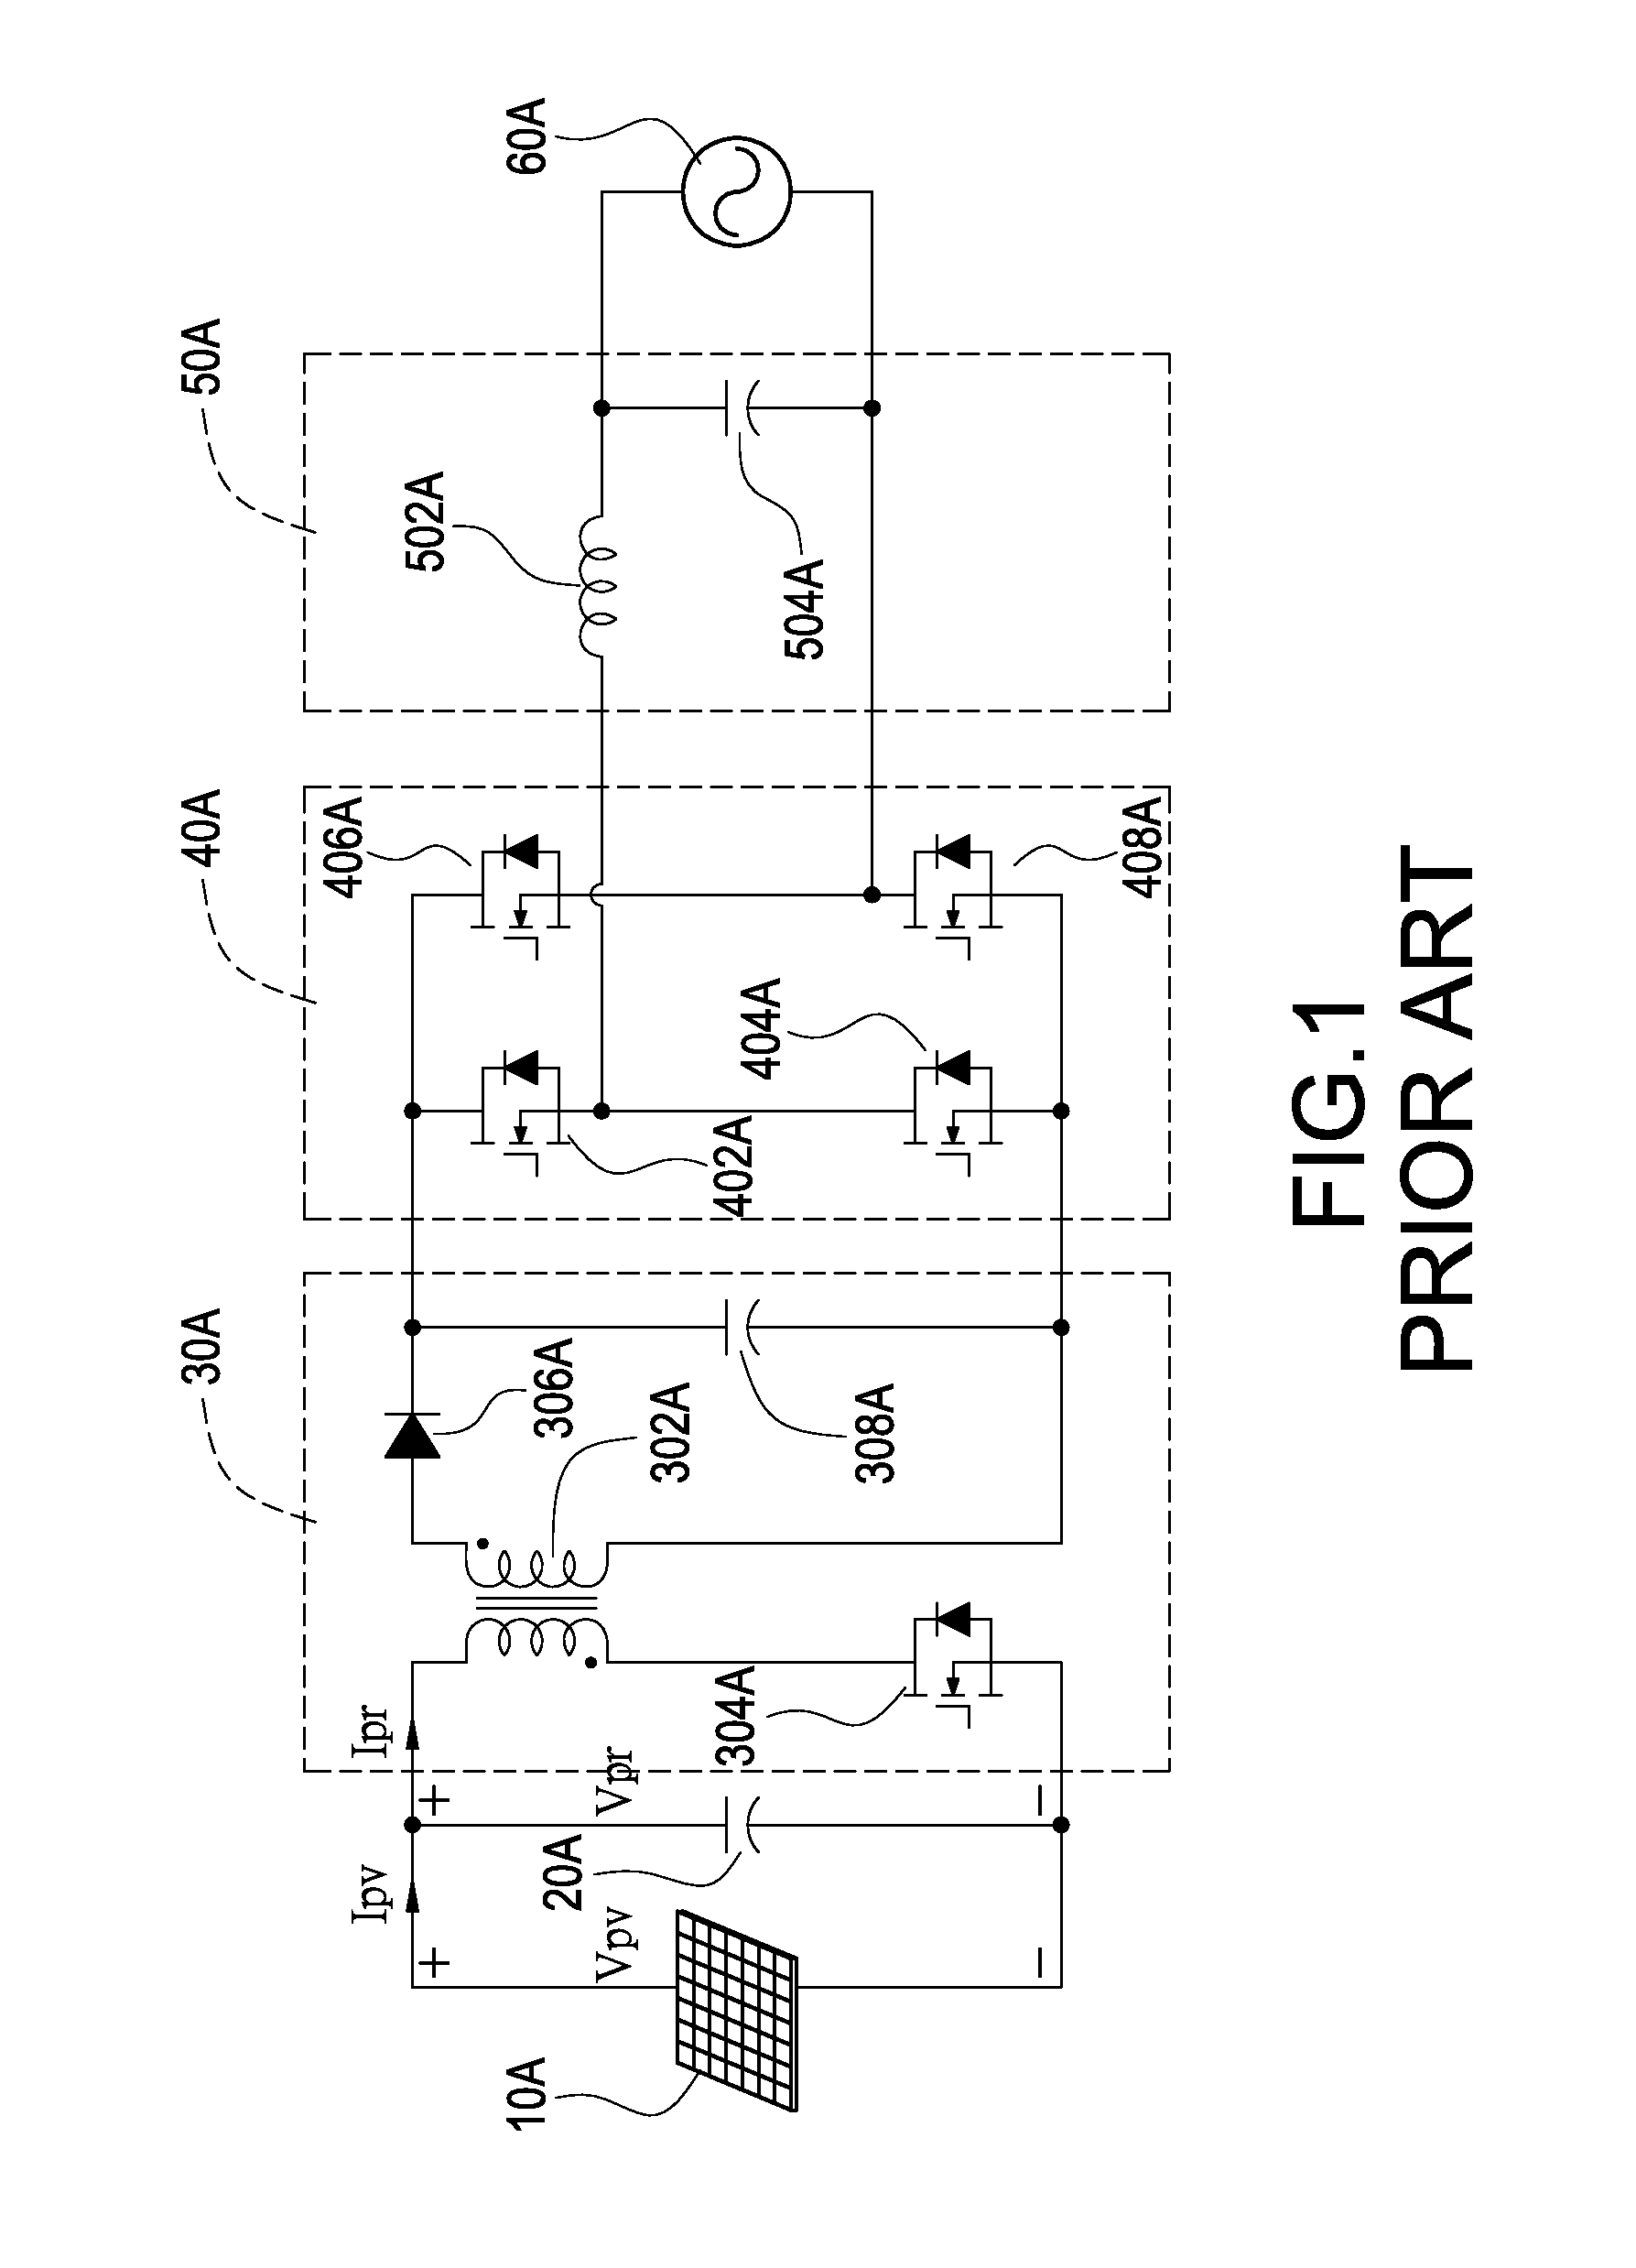 Solar photovoltaic system with capacitance-convertibng function